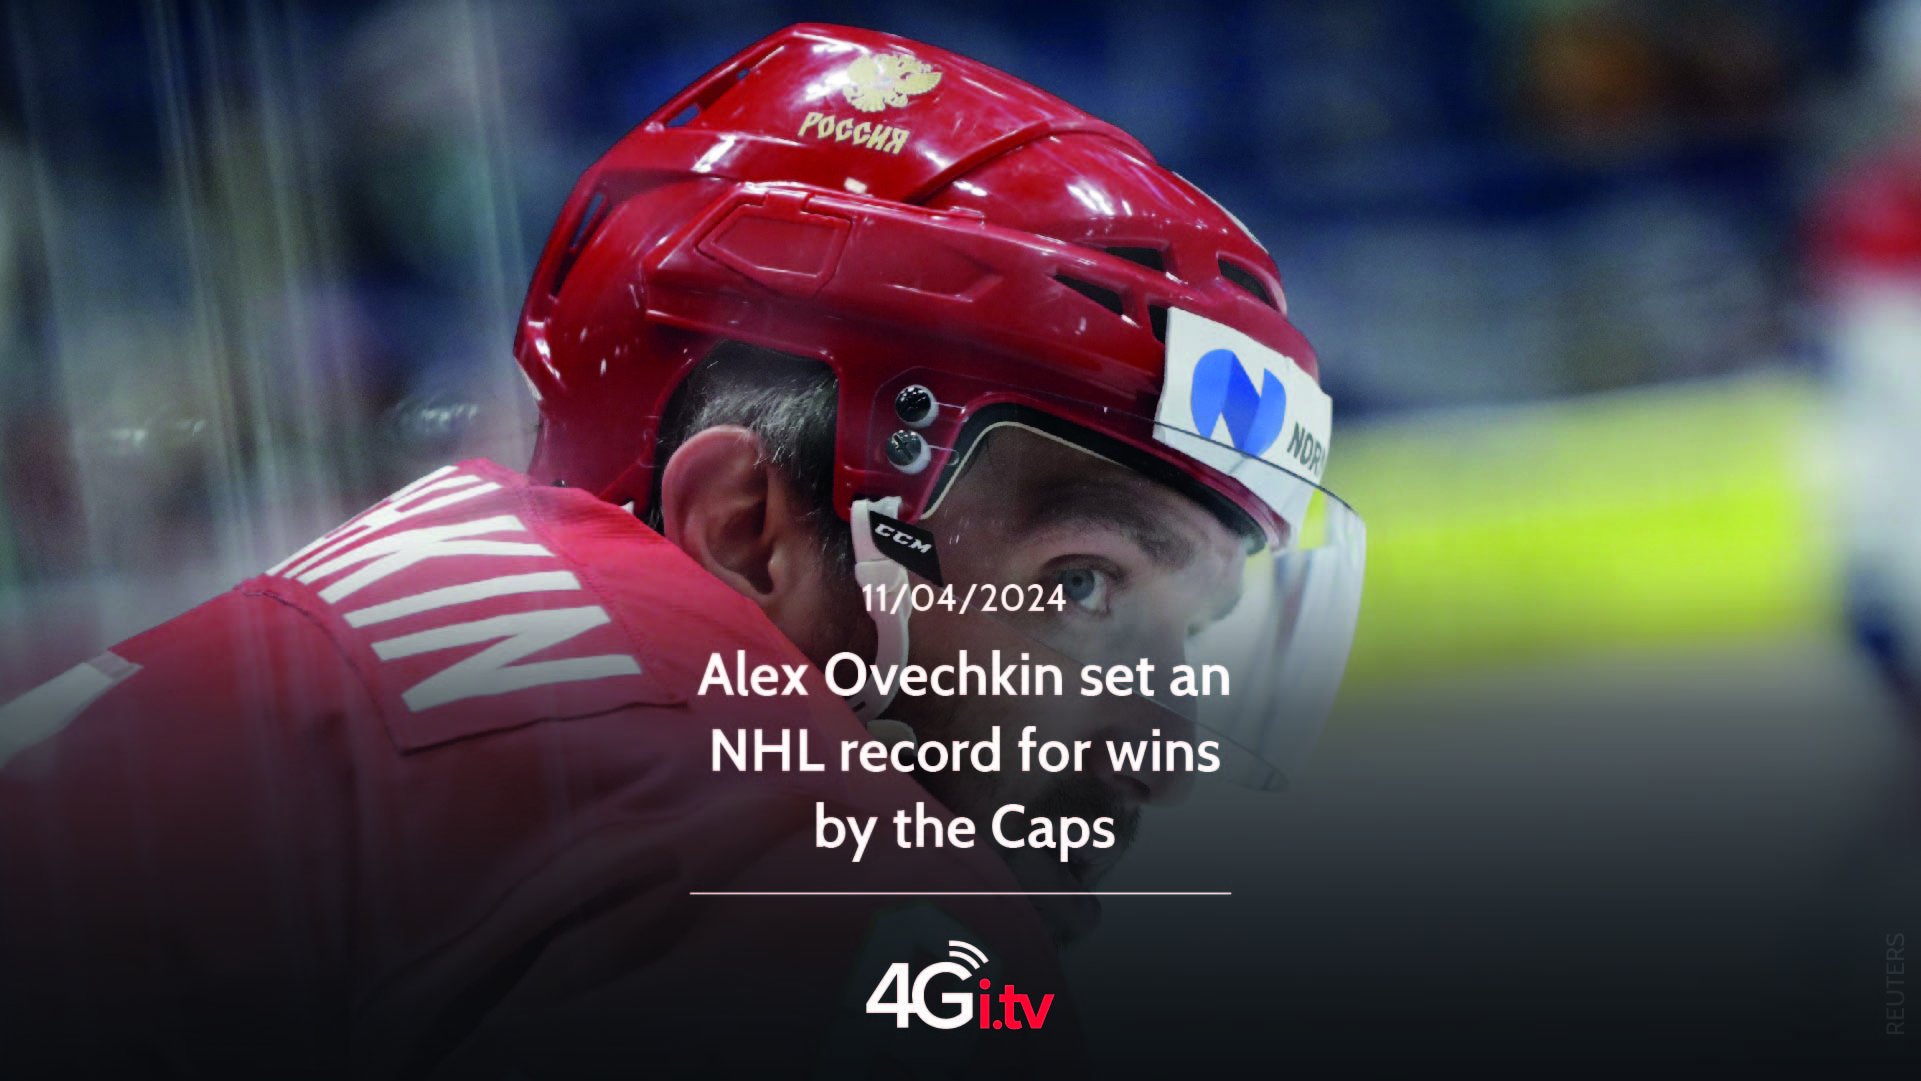 Подробнее о статье Alex Ovechkin set an NHL record for wins by the Caps